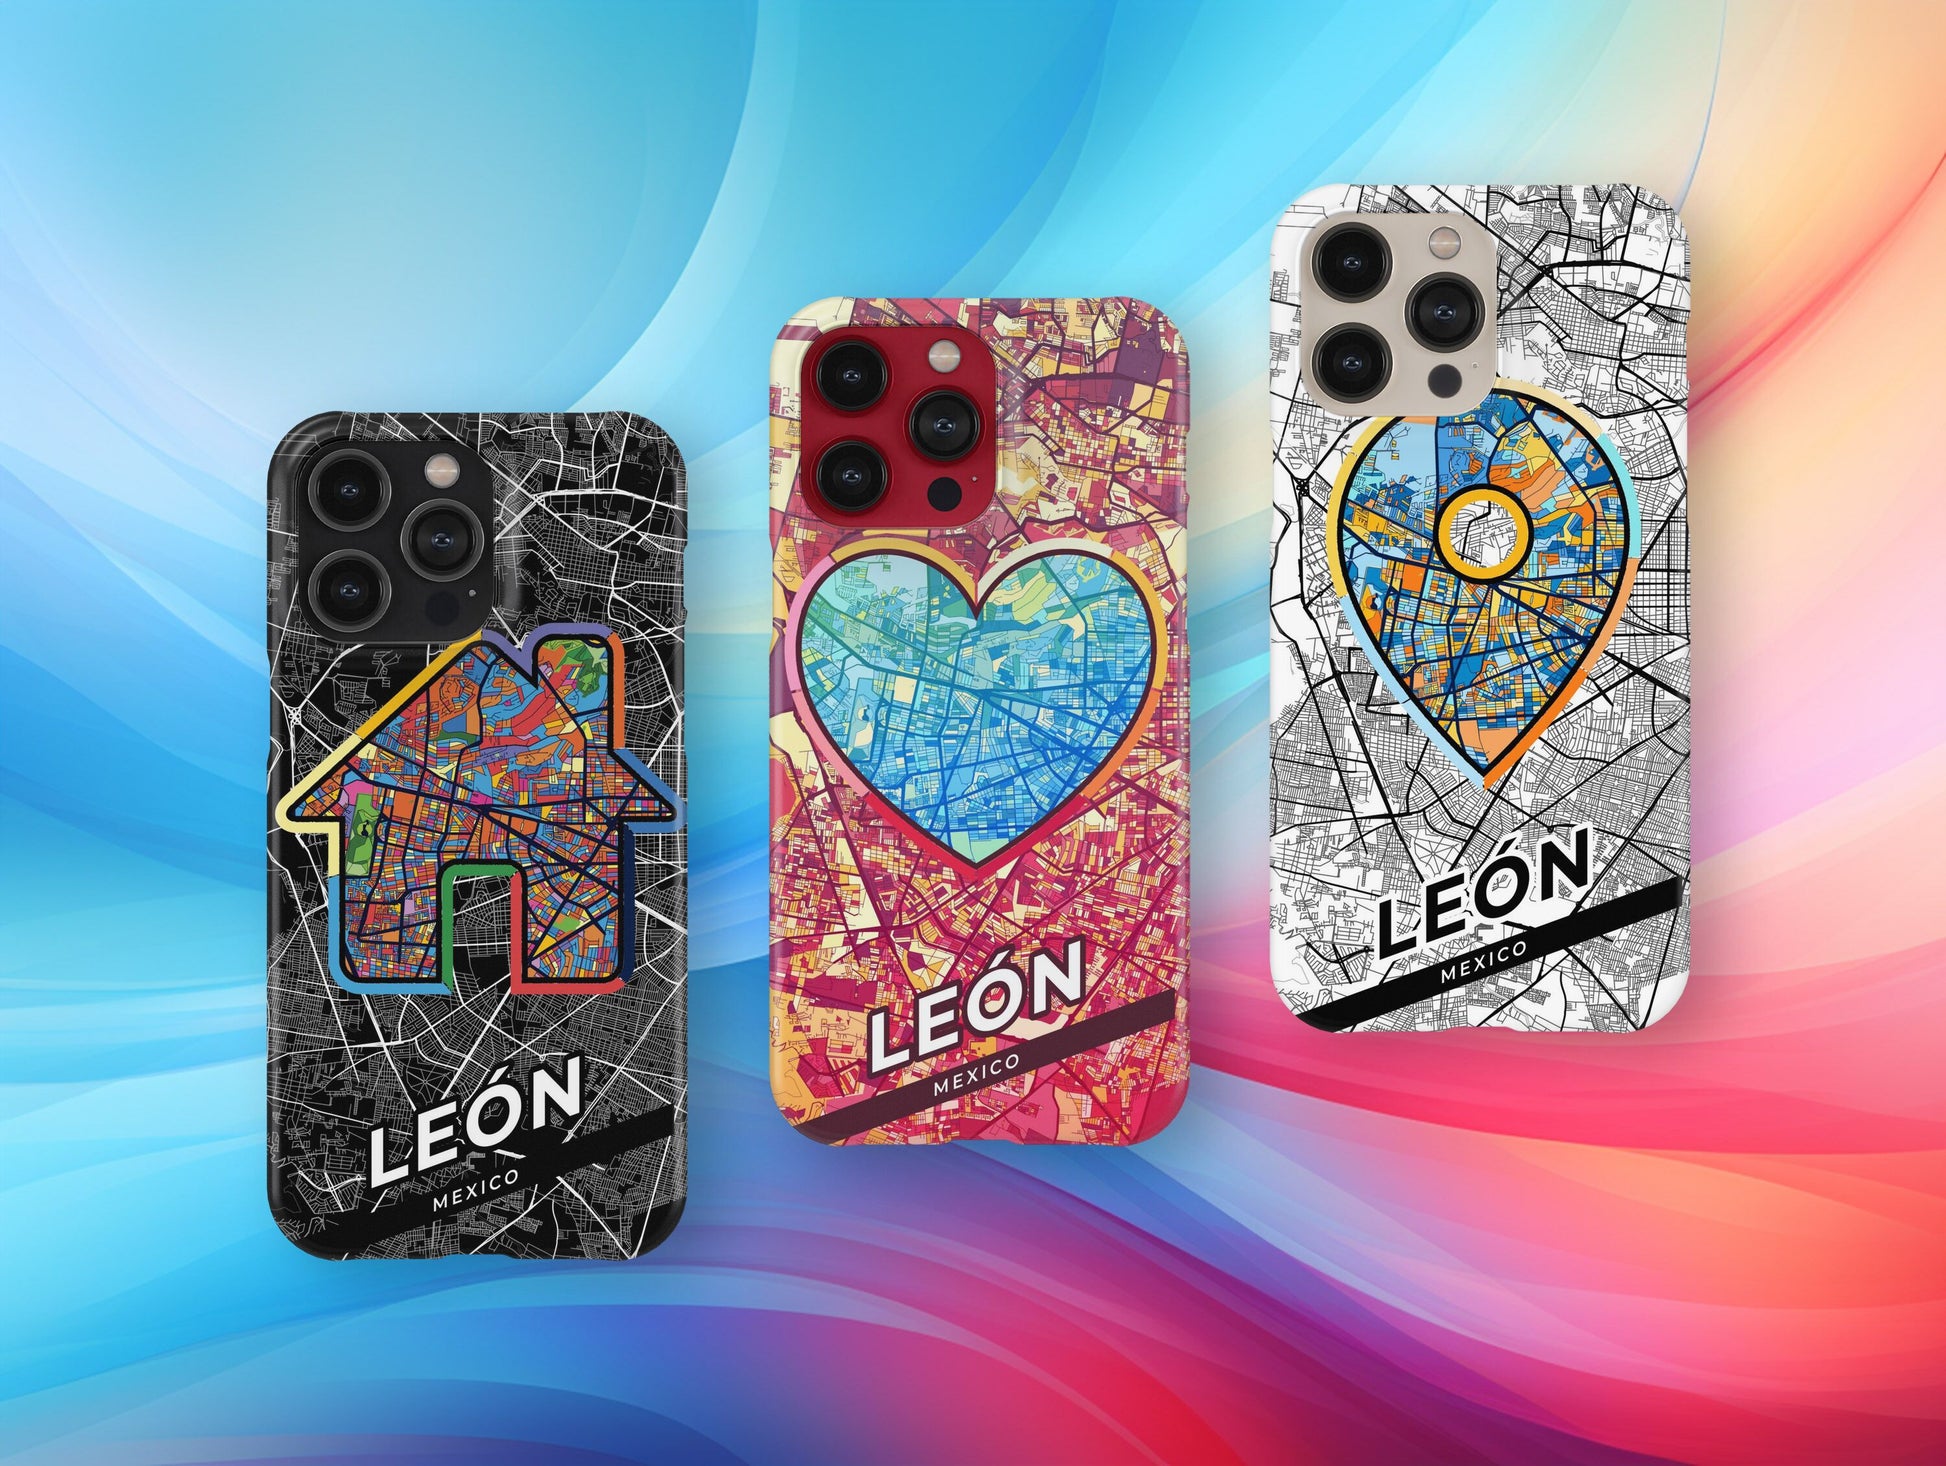 León Mexico slim phone case with colorful icon. Birthday, wedding or housewarming gift. Couple match cases.